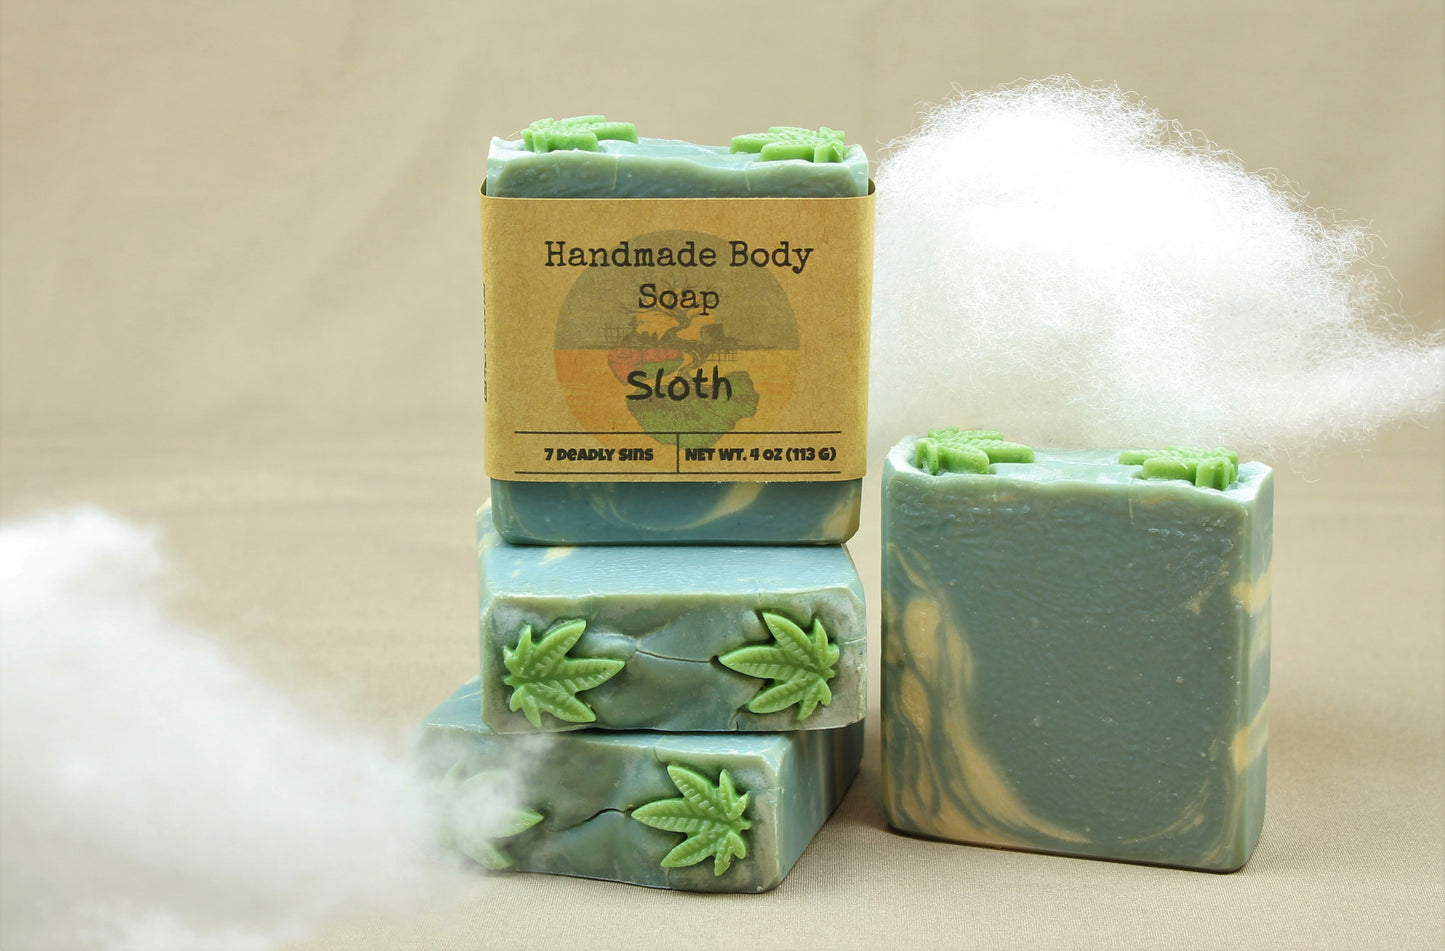 four 4oz homemade soap bars, named "Sloth".  Bars are a beautiful sky blue color, with swirls of white and topped with 2 soap embeds shaped like cannabis leaves.  